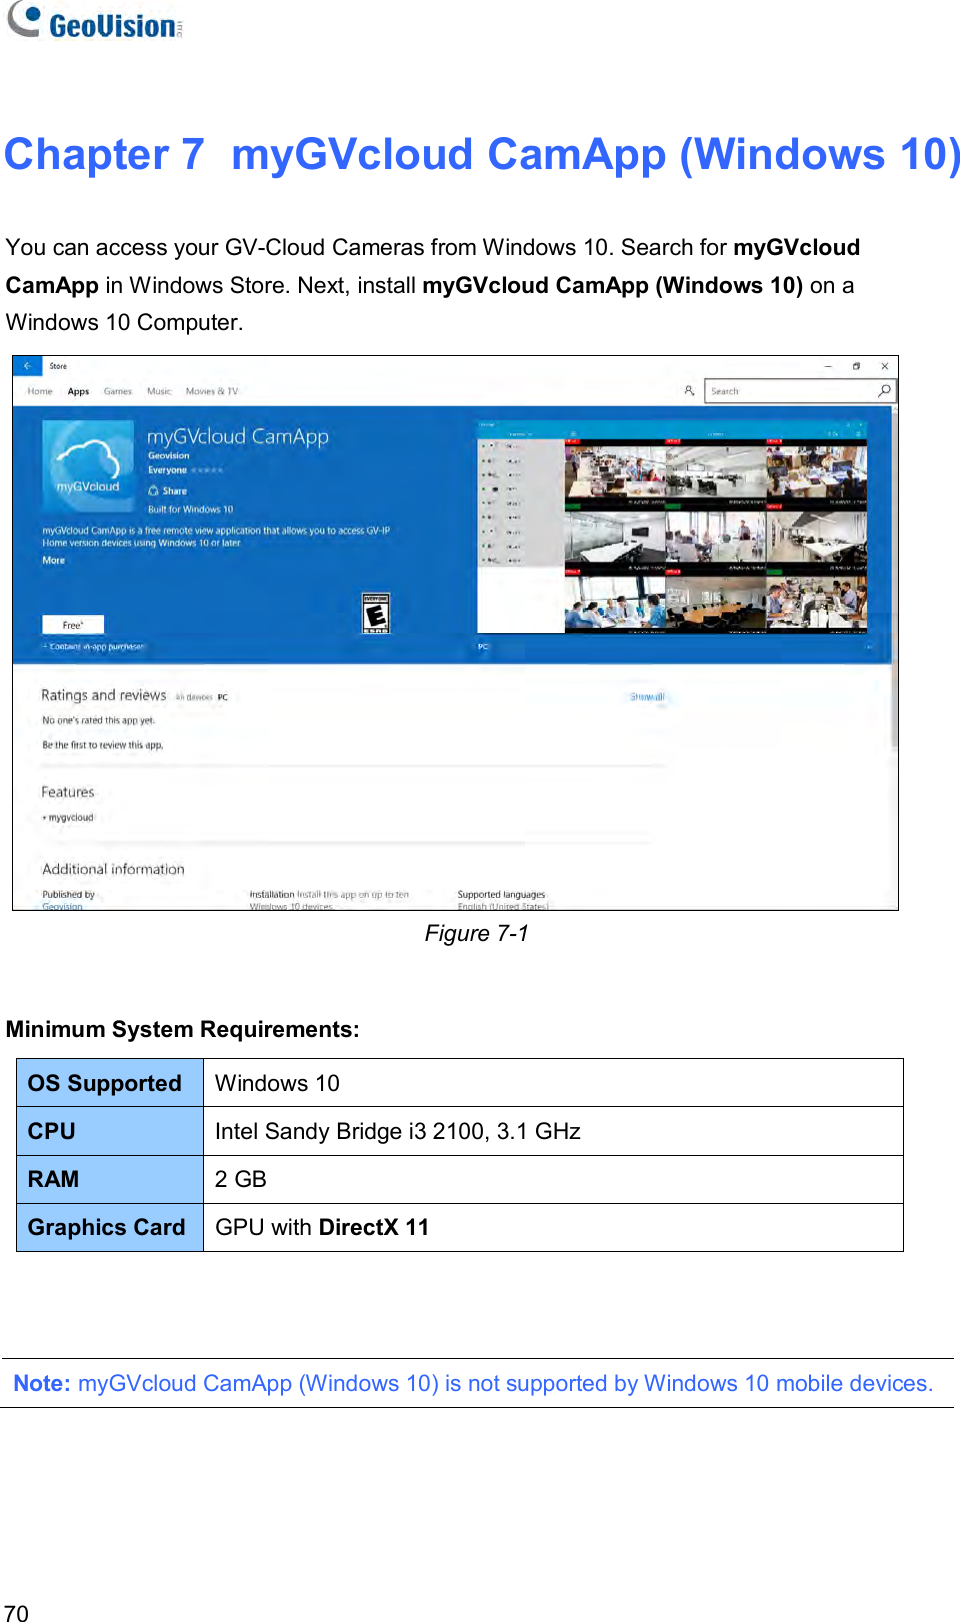   70 Chapter 7  myGVcloud CamApp (Windows 10) You can access your GV-Cloud Cameras from Windows 10. Search for myGVcloud CamApp in Windows Store. Next, install myGVcloud CamApp (Windows 10) on a Windows 10 Computer.    Figure 7-1  Minimum System Requirements: OS Supported  Windows 10 CPU  Intel Sandy Bridge i3 2100, 3.1 GHz  RAM  2 GB Graphics Card GPU with DirectX 11    Note: myGVcloud CamApp (Windows 10) is not supported by Windows 10 mobile devices.  